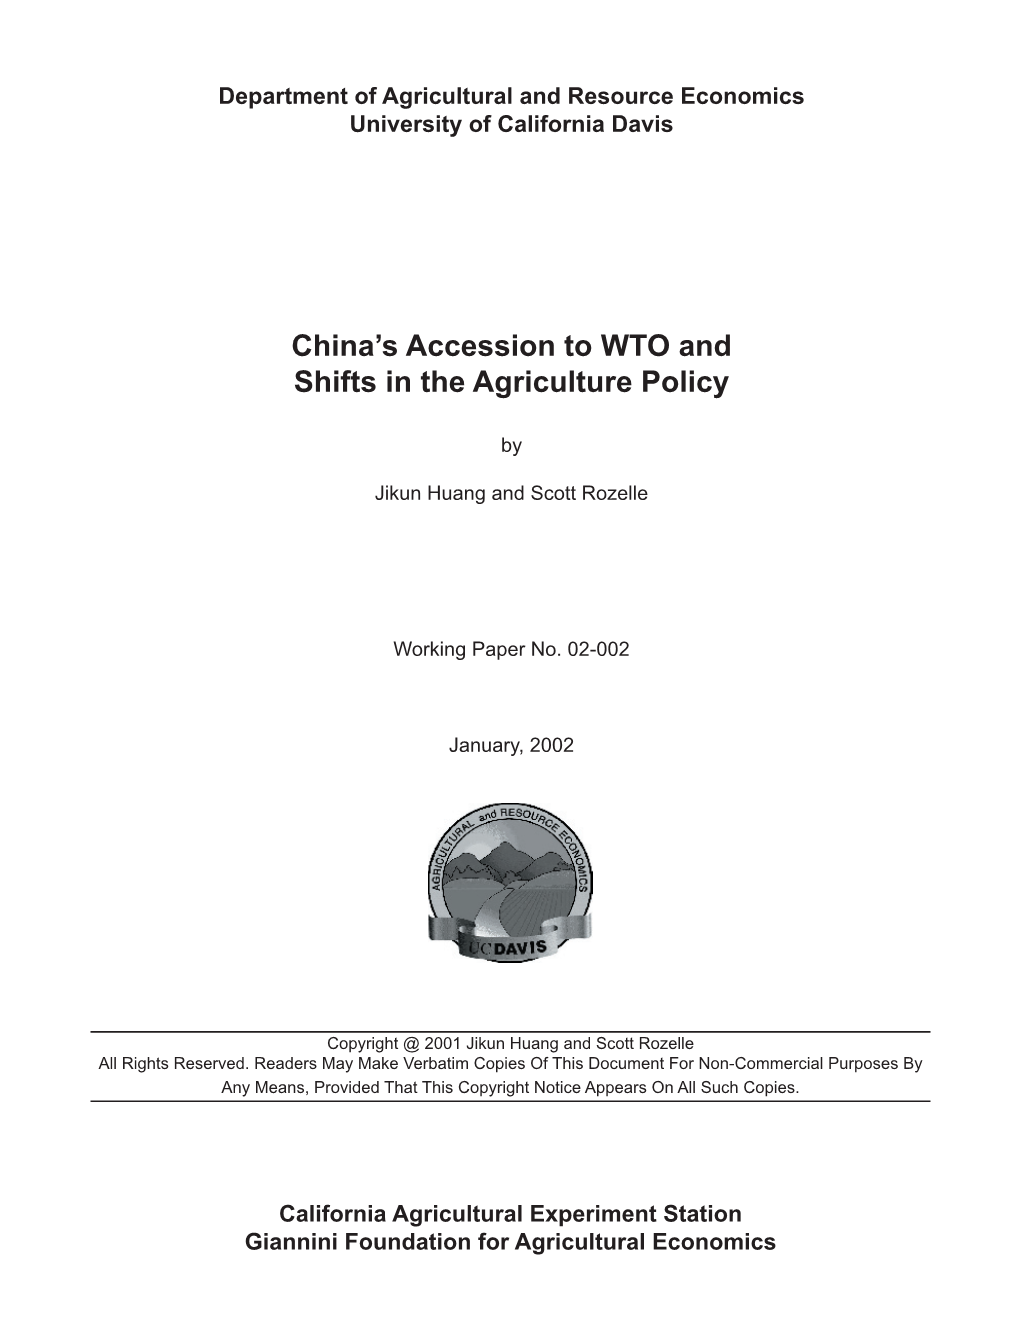 China's Accession to WTO and Shifts in the Agriculture Policy